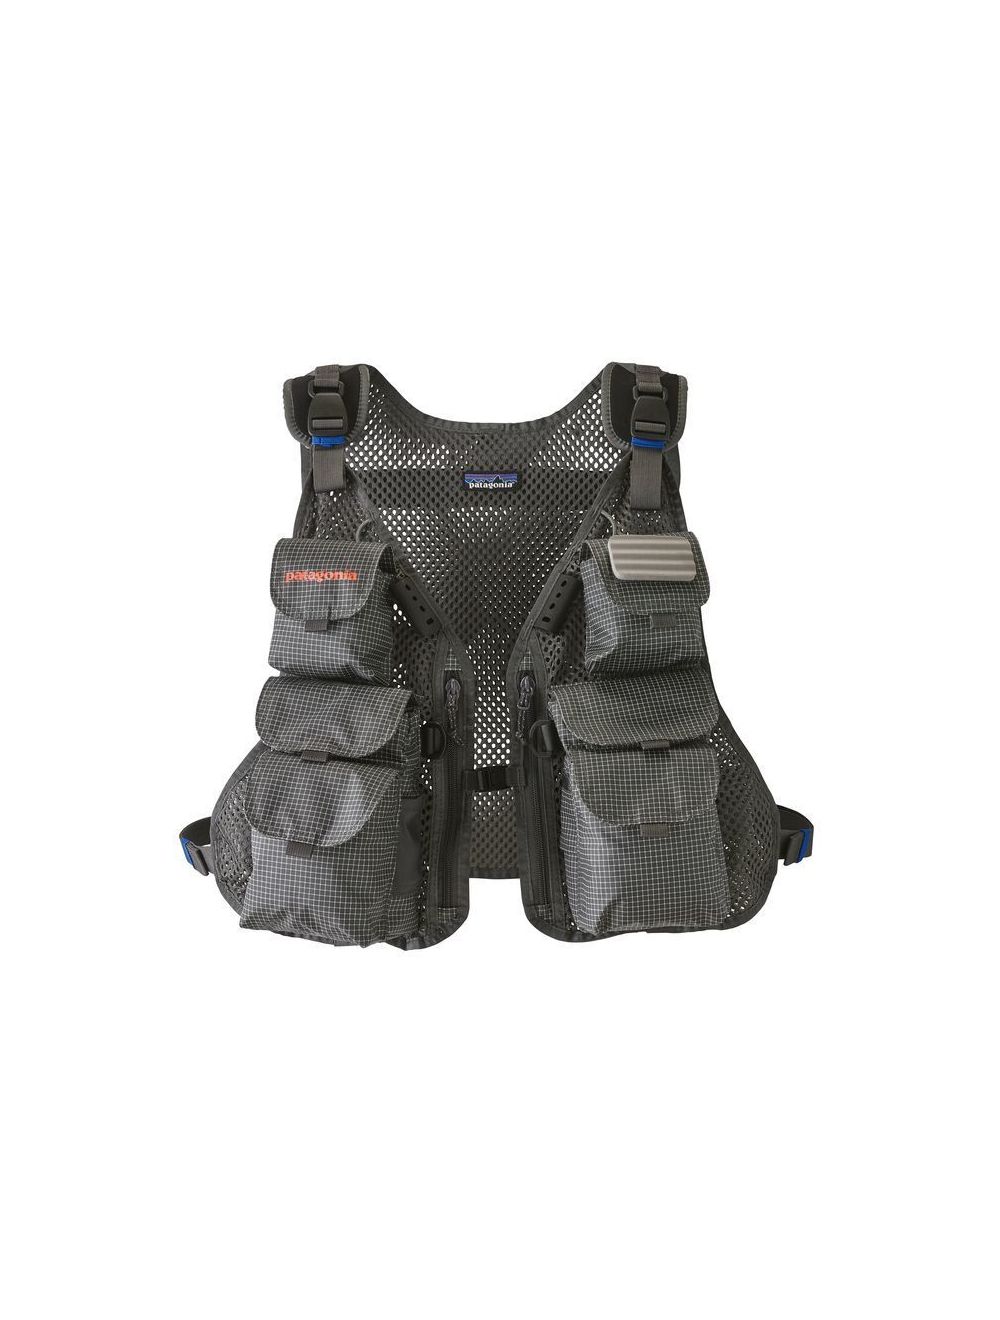 Patagonia Convertible Vest - Forge Grey